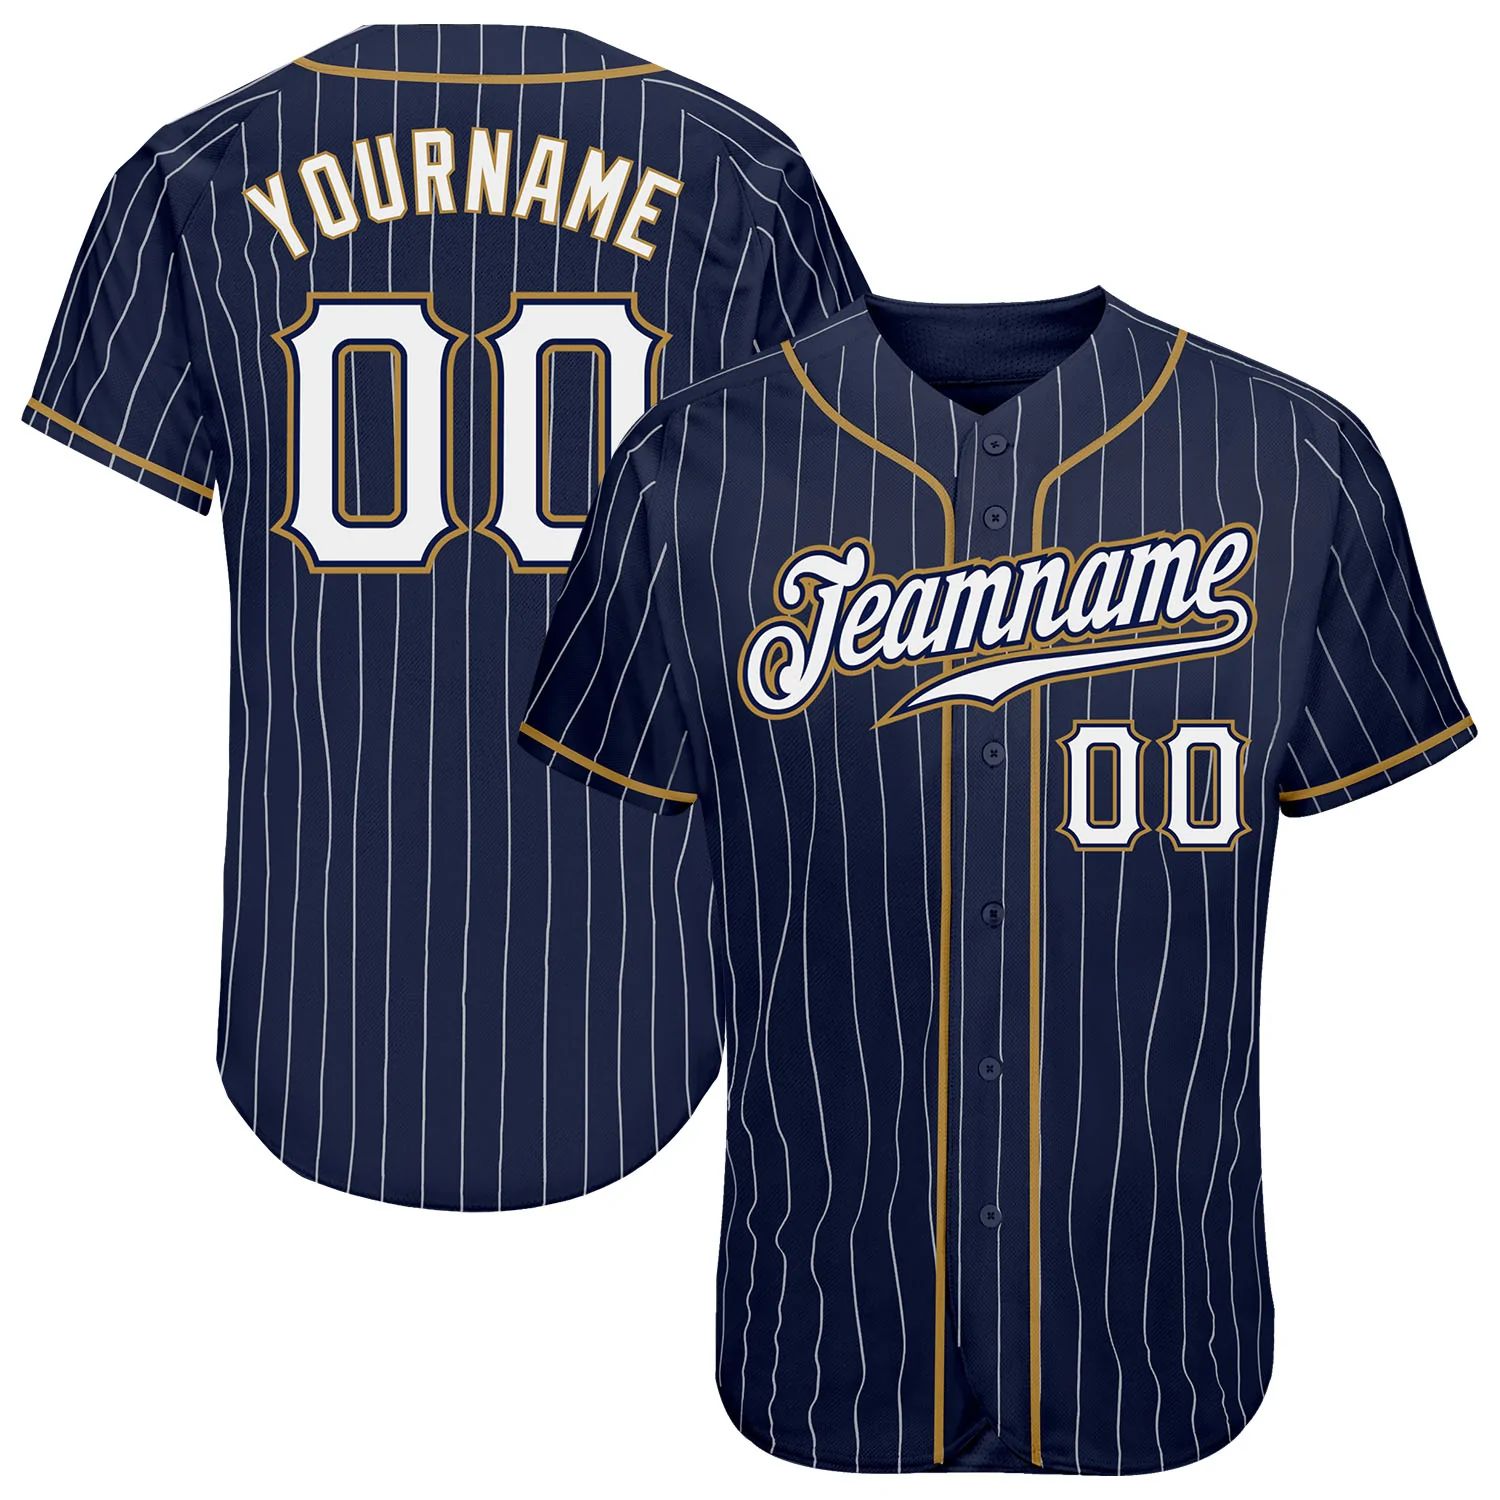 build-old-gold-navy-pinstripe-baseball-white-jersey-authentic-navy0220-online-1.jpg